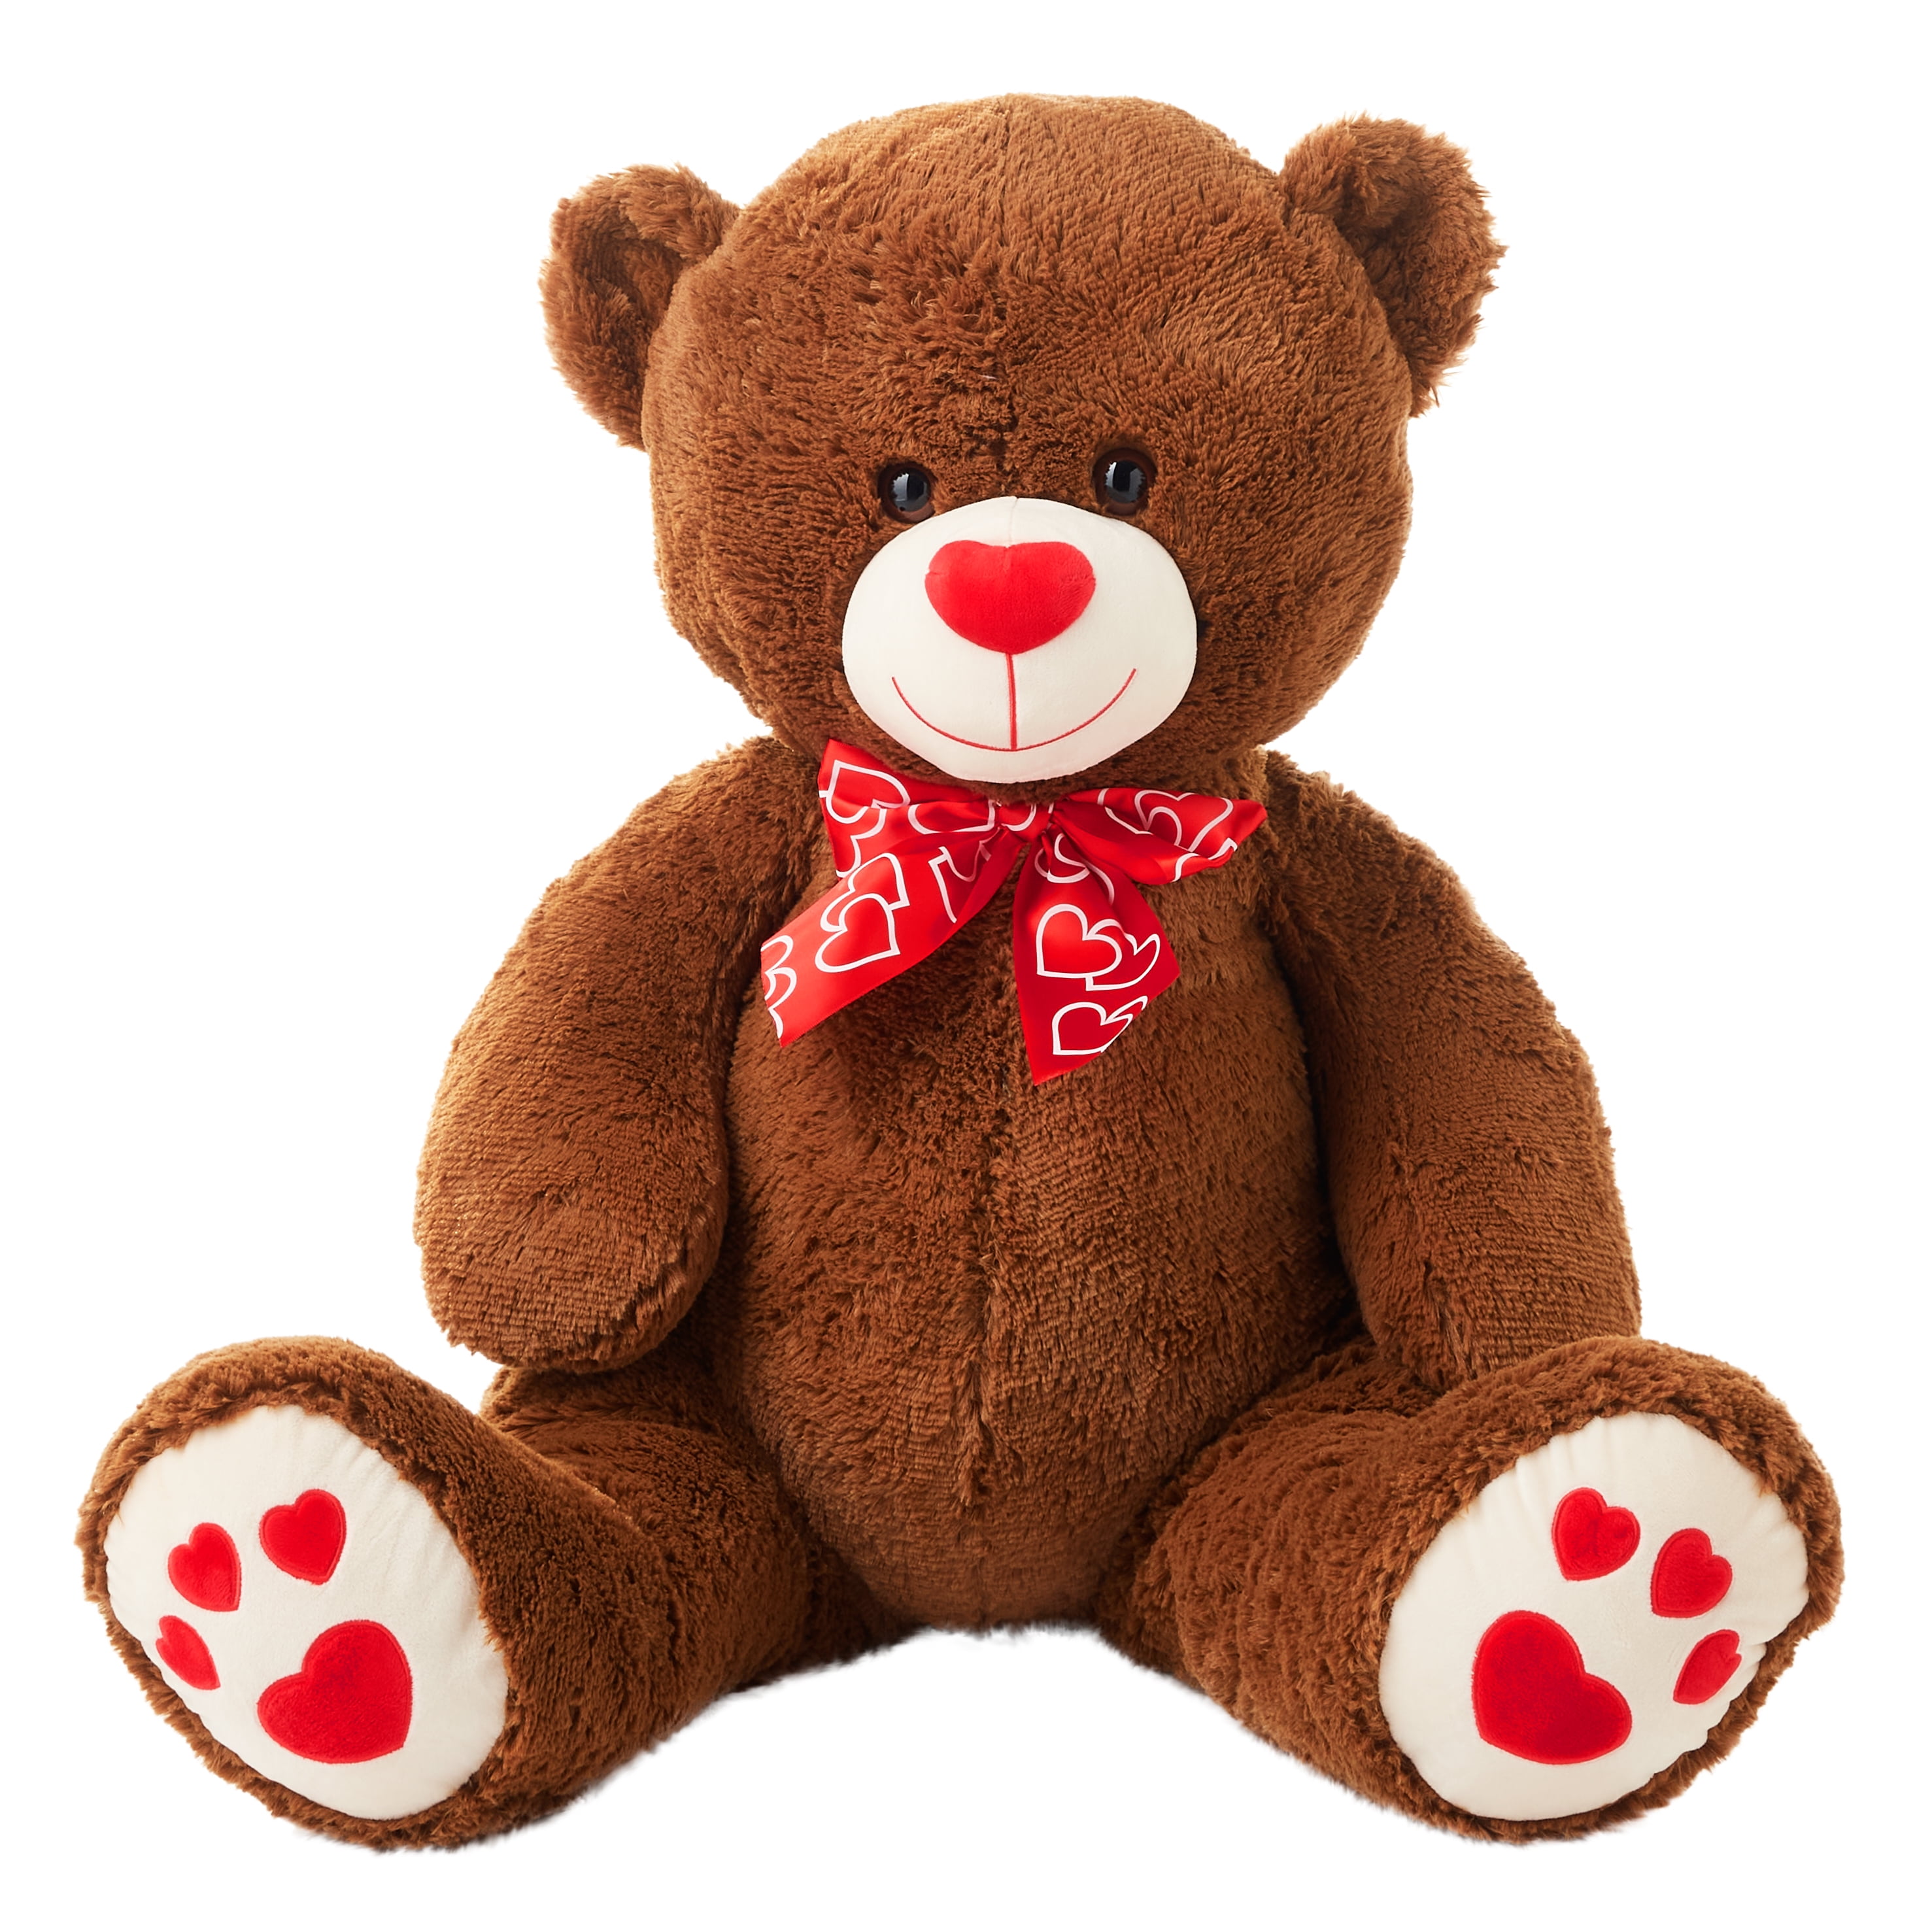 Details about   NEW COFFEE SCENTED MOCHA Stuffed PLUSH Toy MED BROWN TEDDY BEAR Valentine Gift 